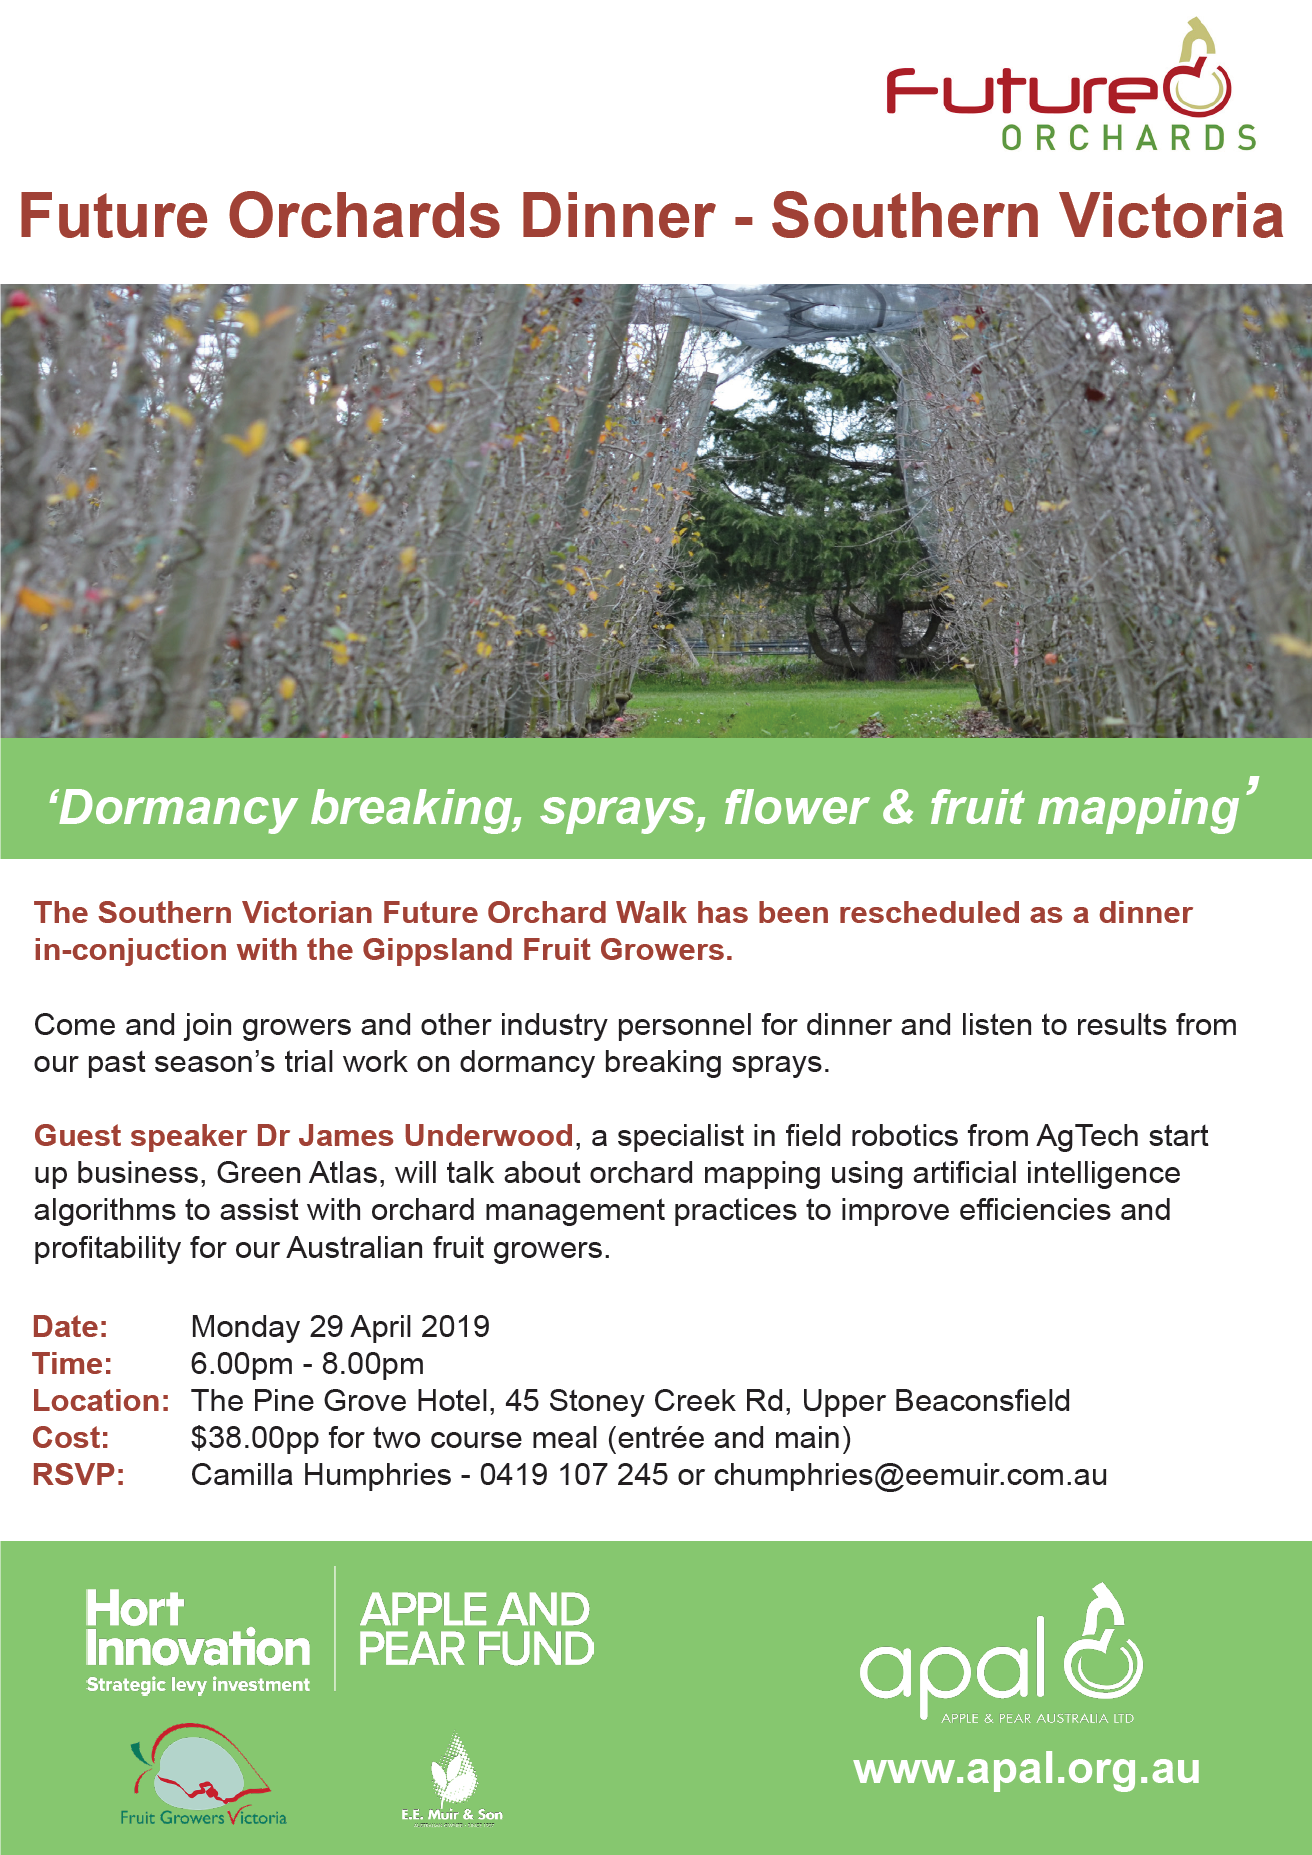 Future Orchards Dinner- Southern Victoria. Monday 29th April 2019 at The Pine Grove Hotel, 45 Stoney Creek Rd, Upper Beaconsfield